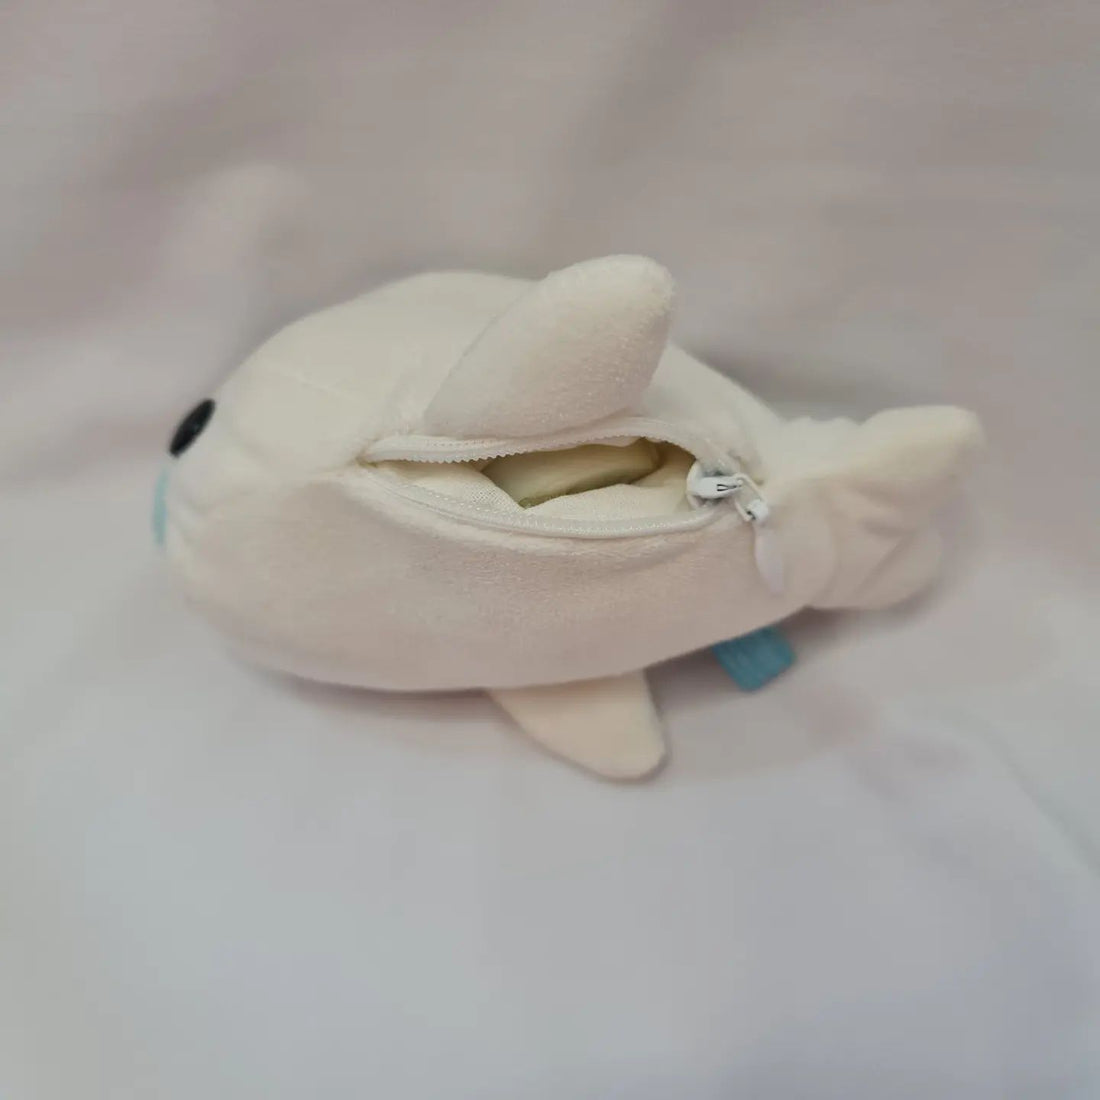 Soft Toy Repairs - Pouch Installation for Stuffed Toy